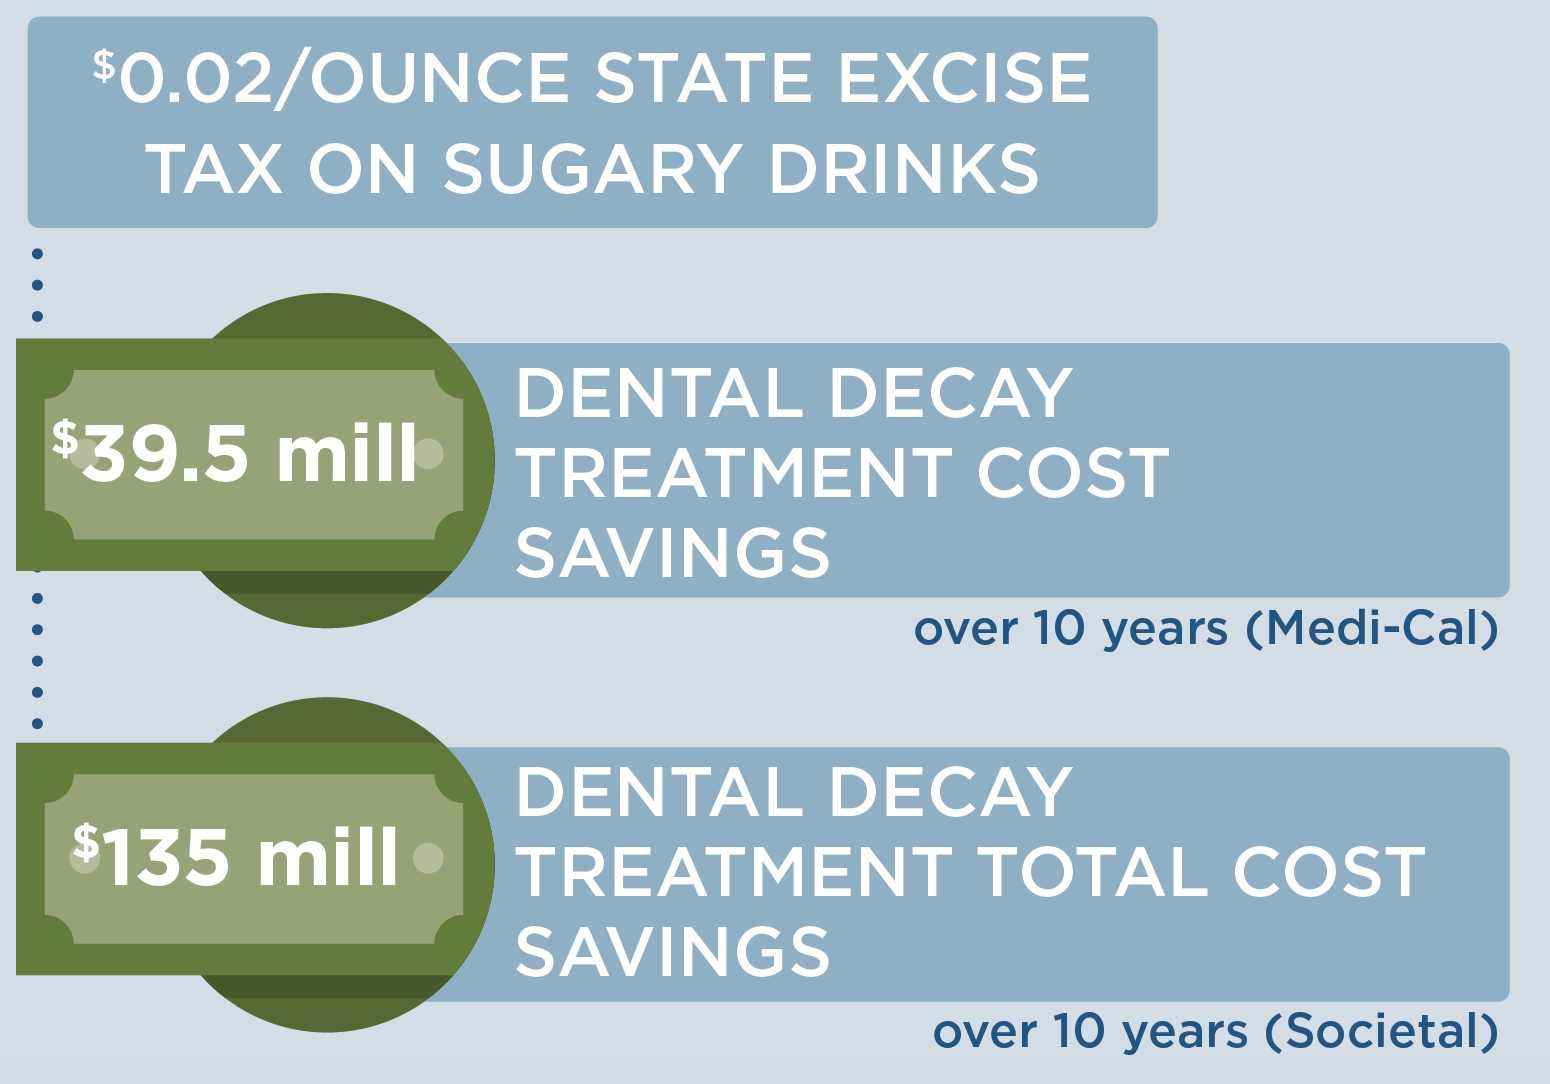 $0.02 per ounce state excise tax on sugary drinks would lead to $39.5 million in dental decay treatment cost savings over 10 years (Medi-Cal) and $135 million in dental decay treatment total cost savings over 10 years (Societal)